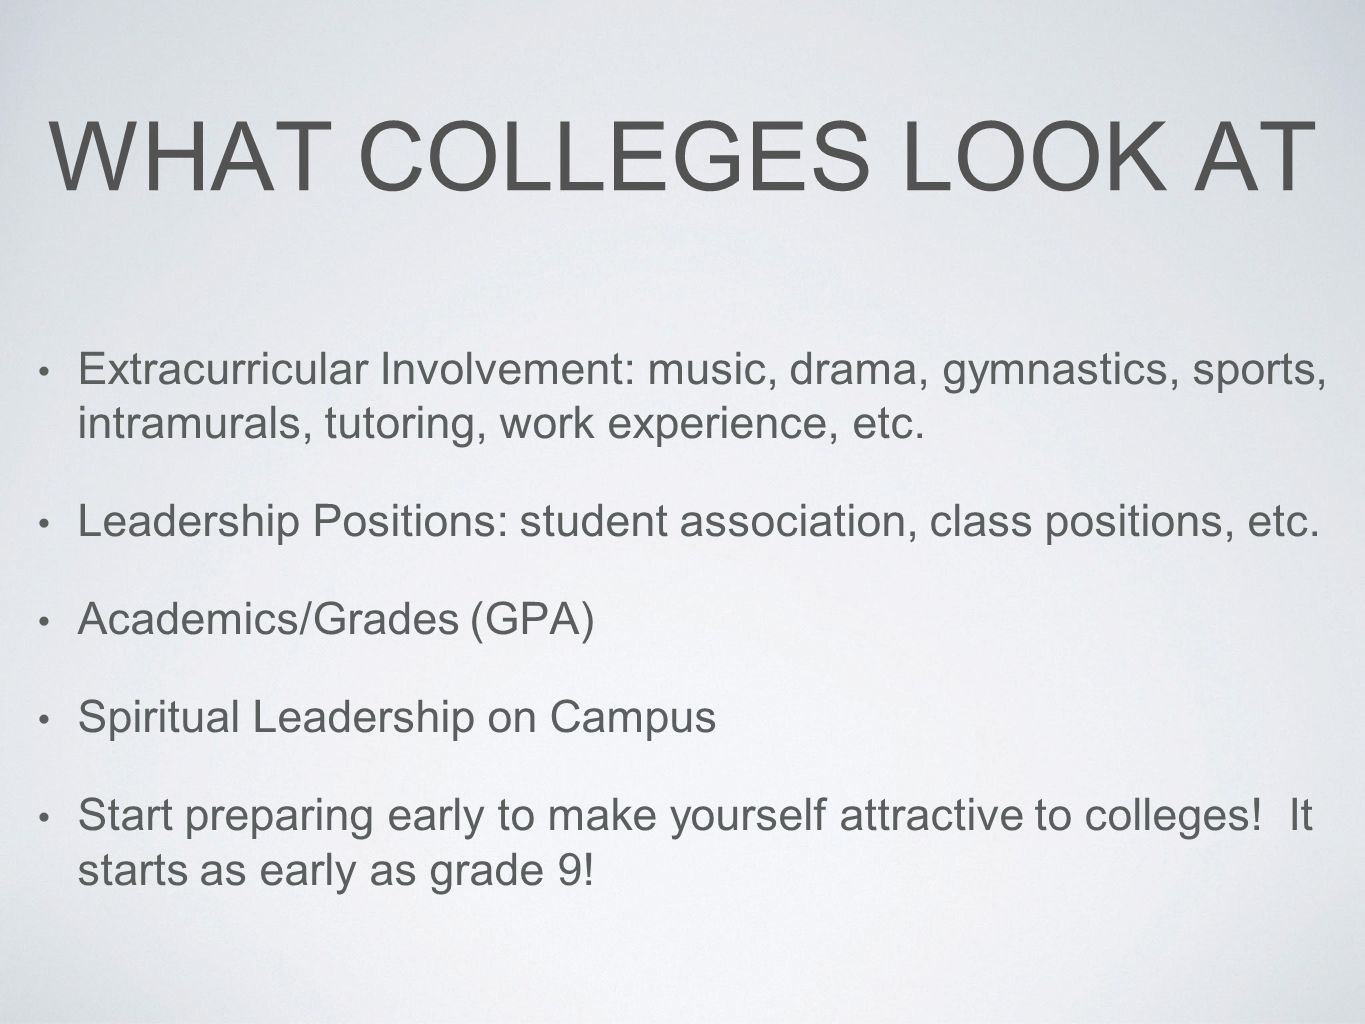 WHAT COLLEGES LOOK AT Extracurricular Involvement: music, drama, gymnastics, sports, intramurals, tutoring, work experience, etc.